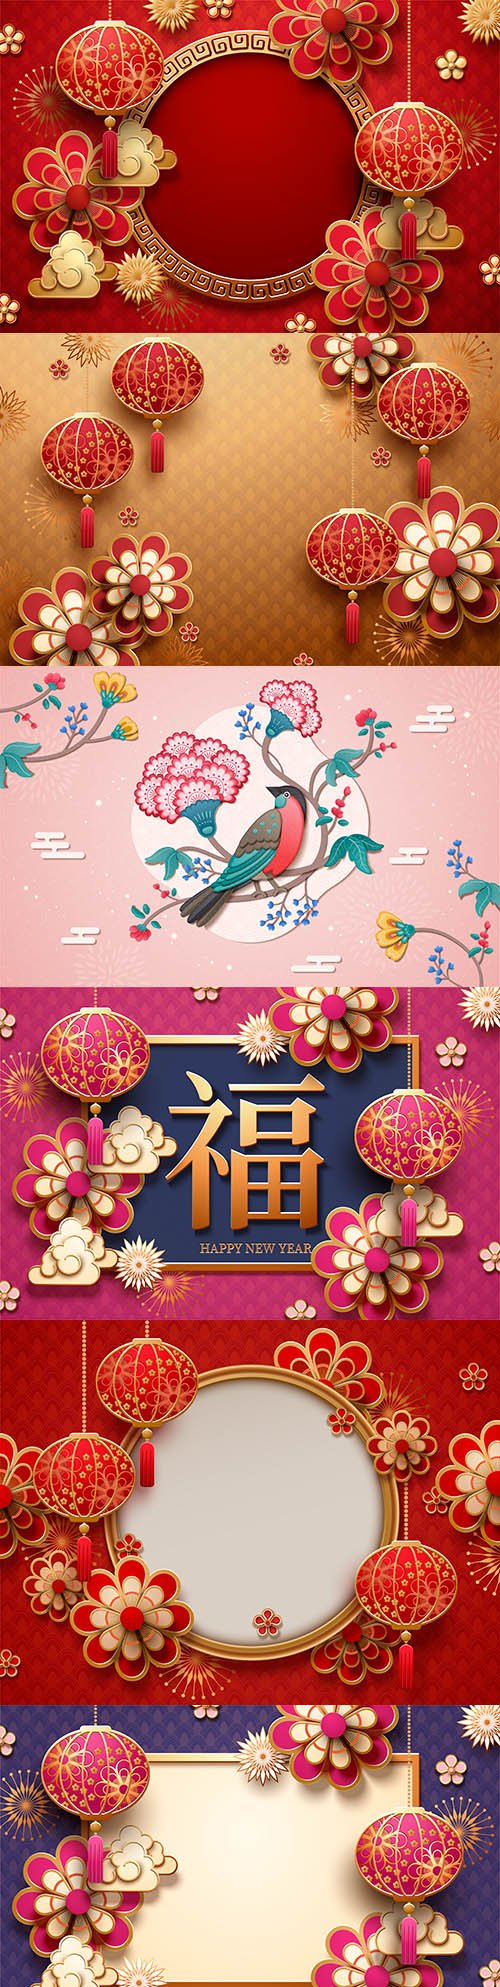 Traditional lunar year background with suspended lights